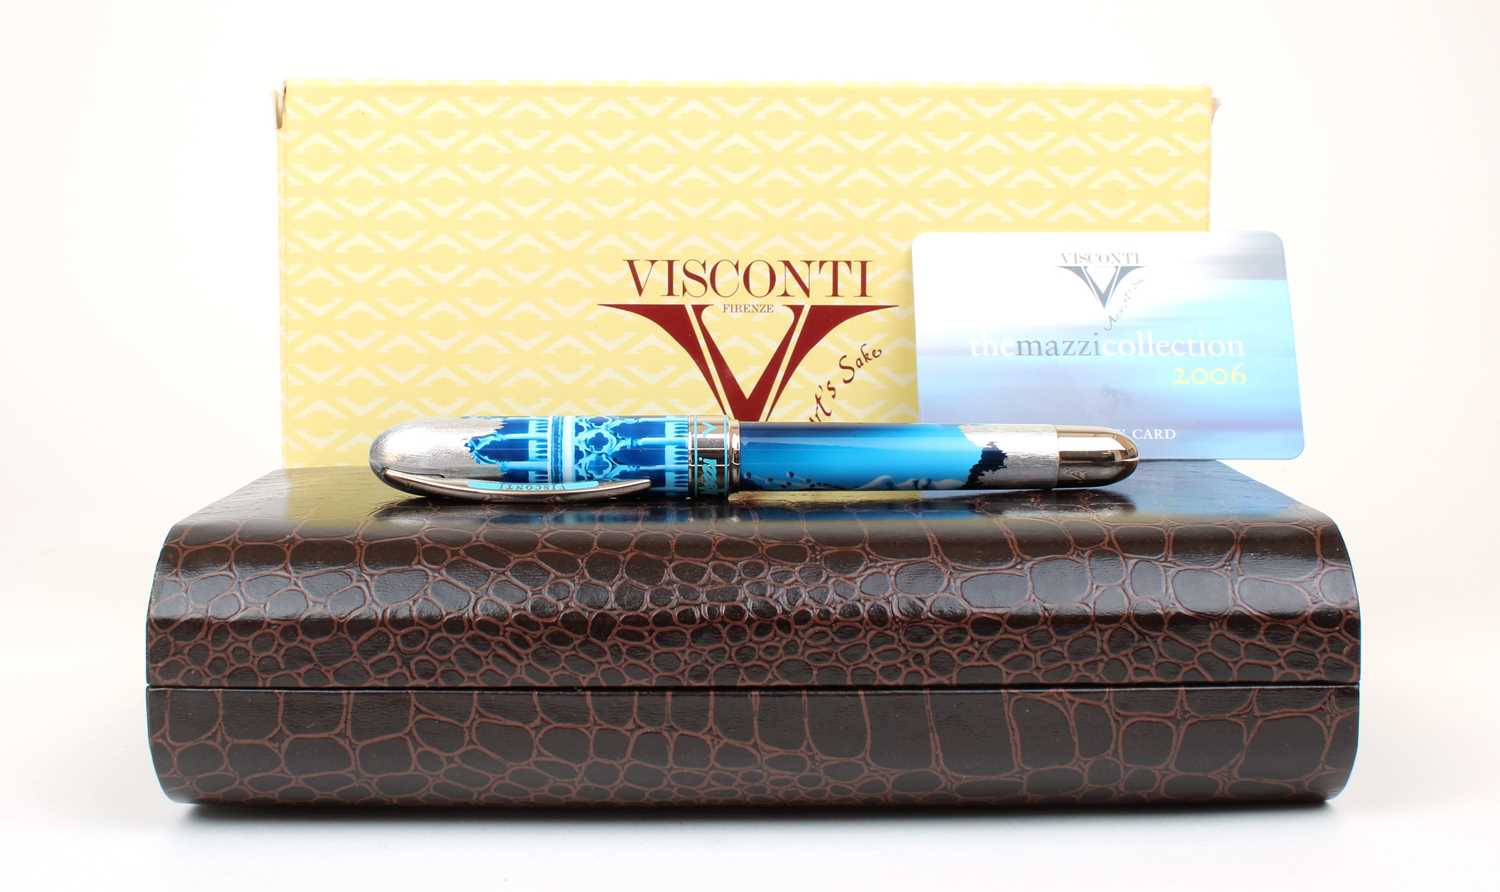 Claudio Mazzi for Visconti, Firenze "Blue Symphony" Limited Edition Fountain Pen - Image 5 of 7